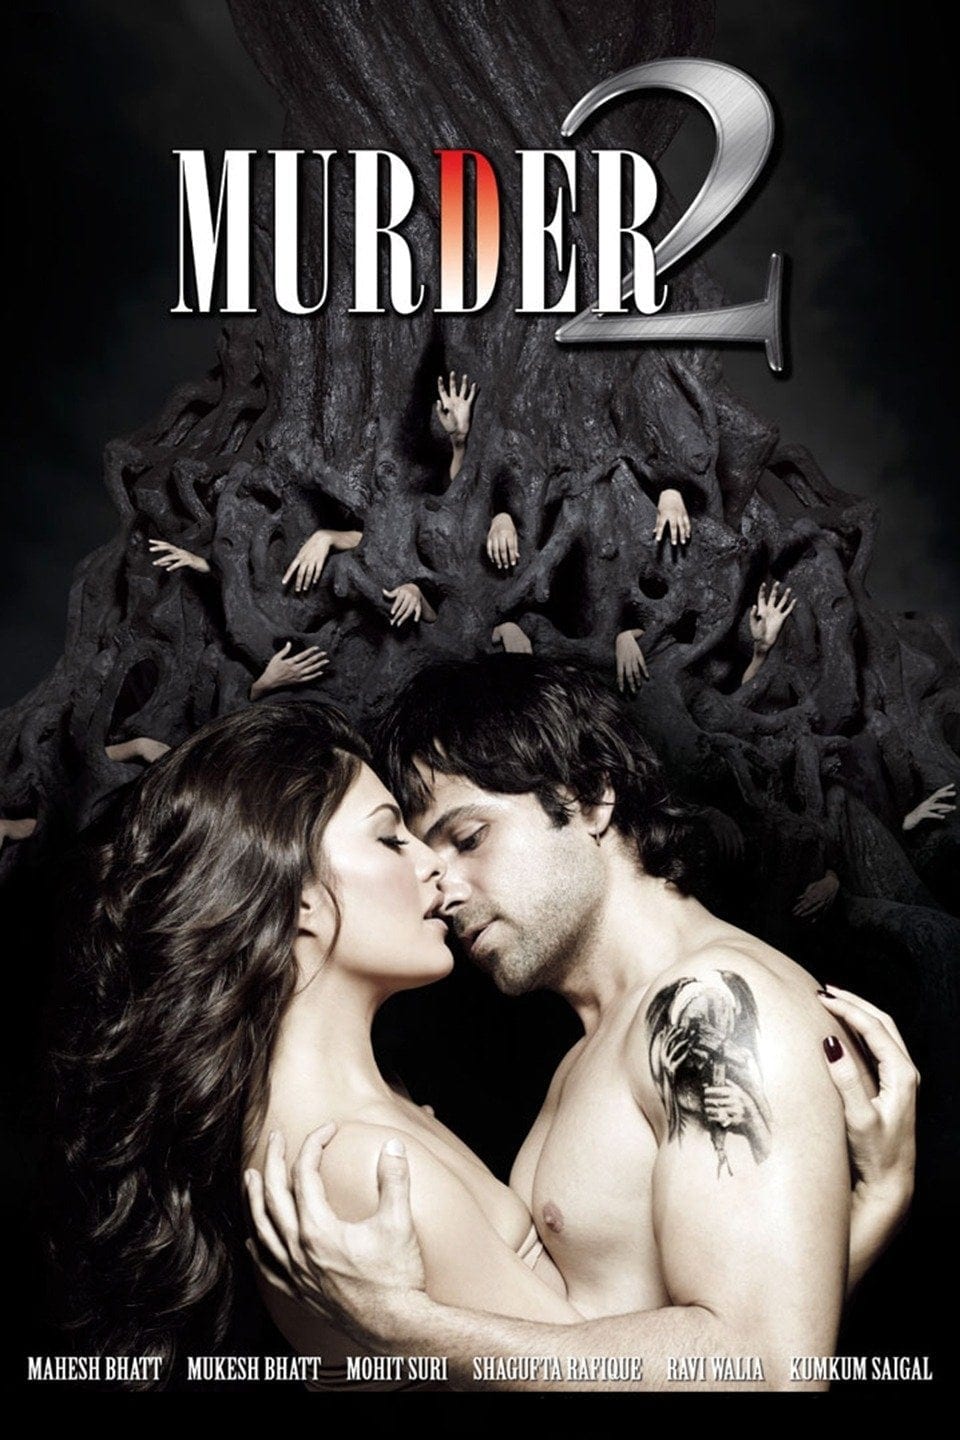 Poster for the movie "Murder 2"